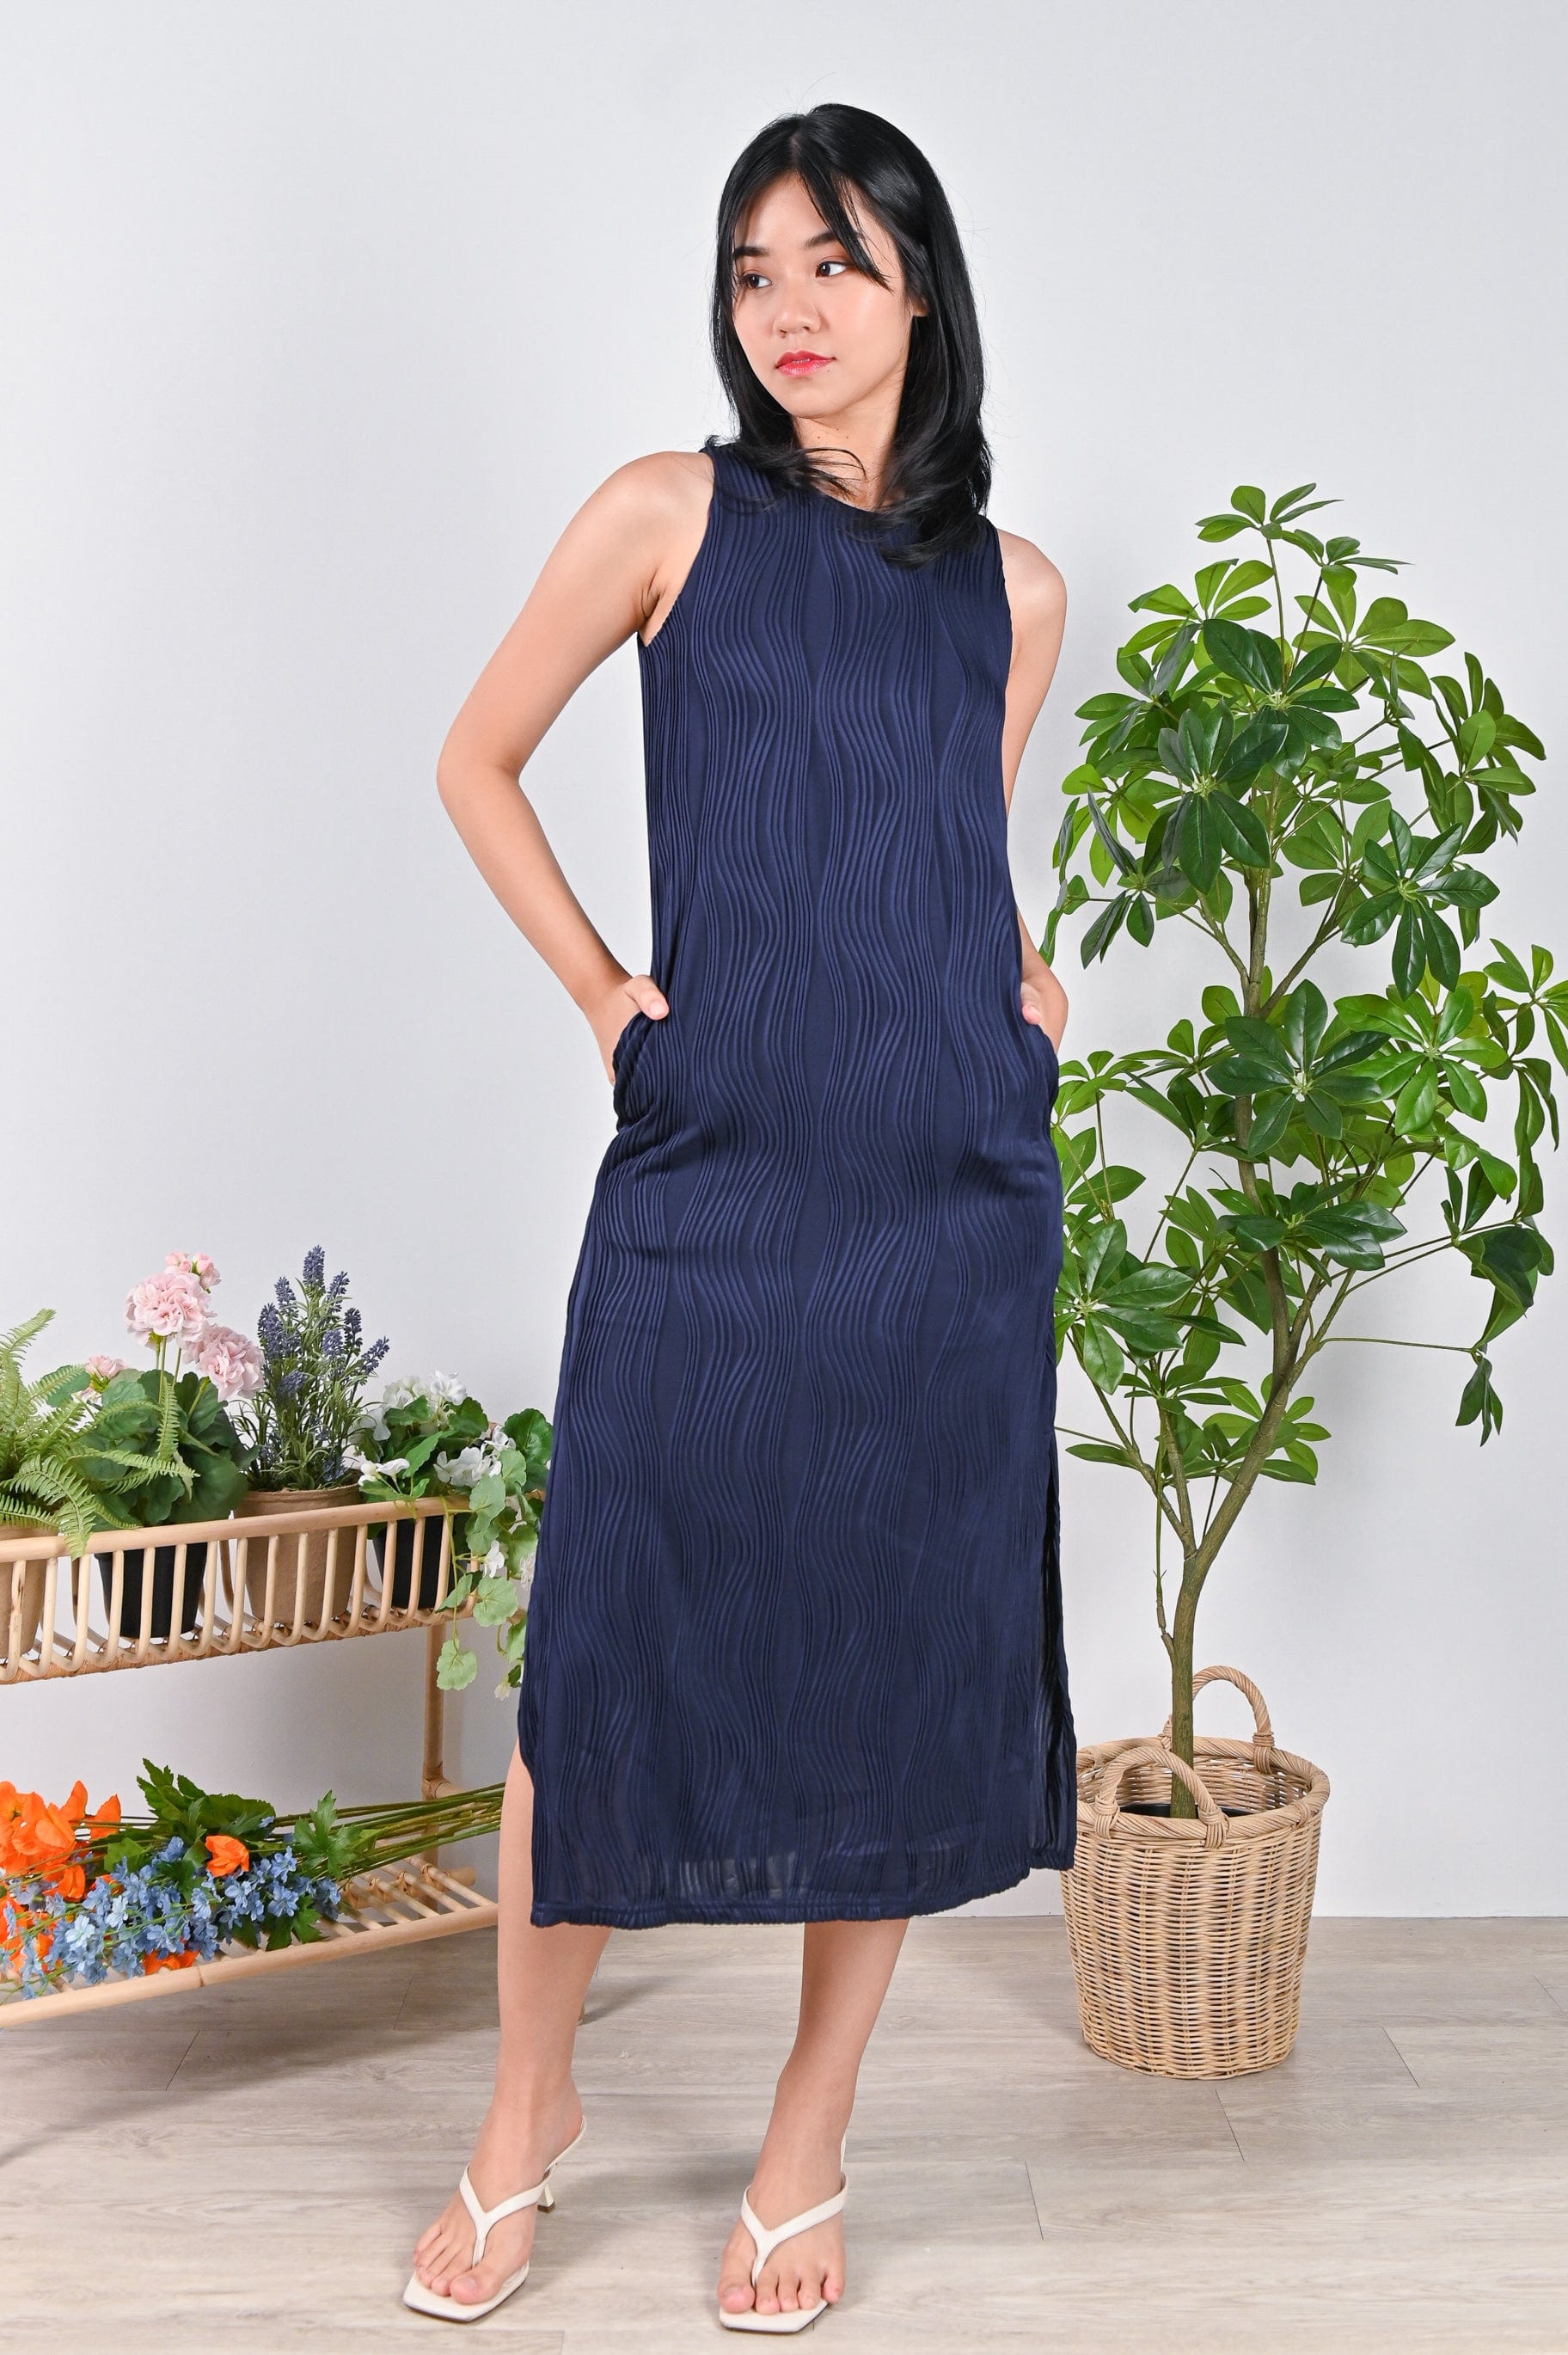 HEDDI CURVED LINES SLEEVELESS DRESS IN NAVY – All